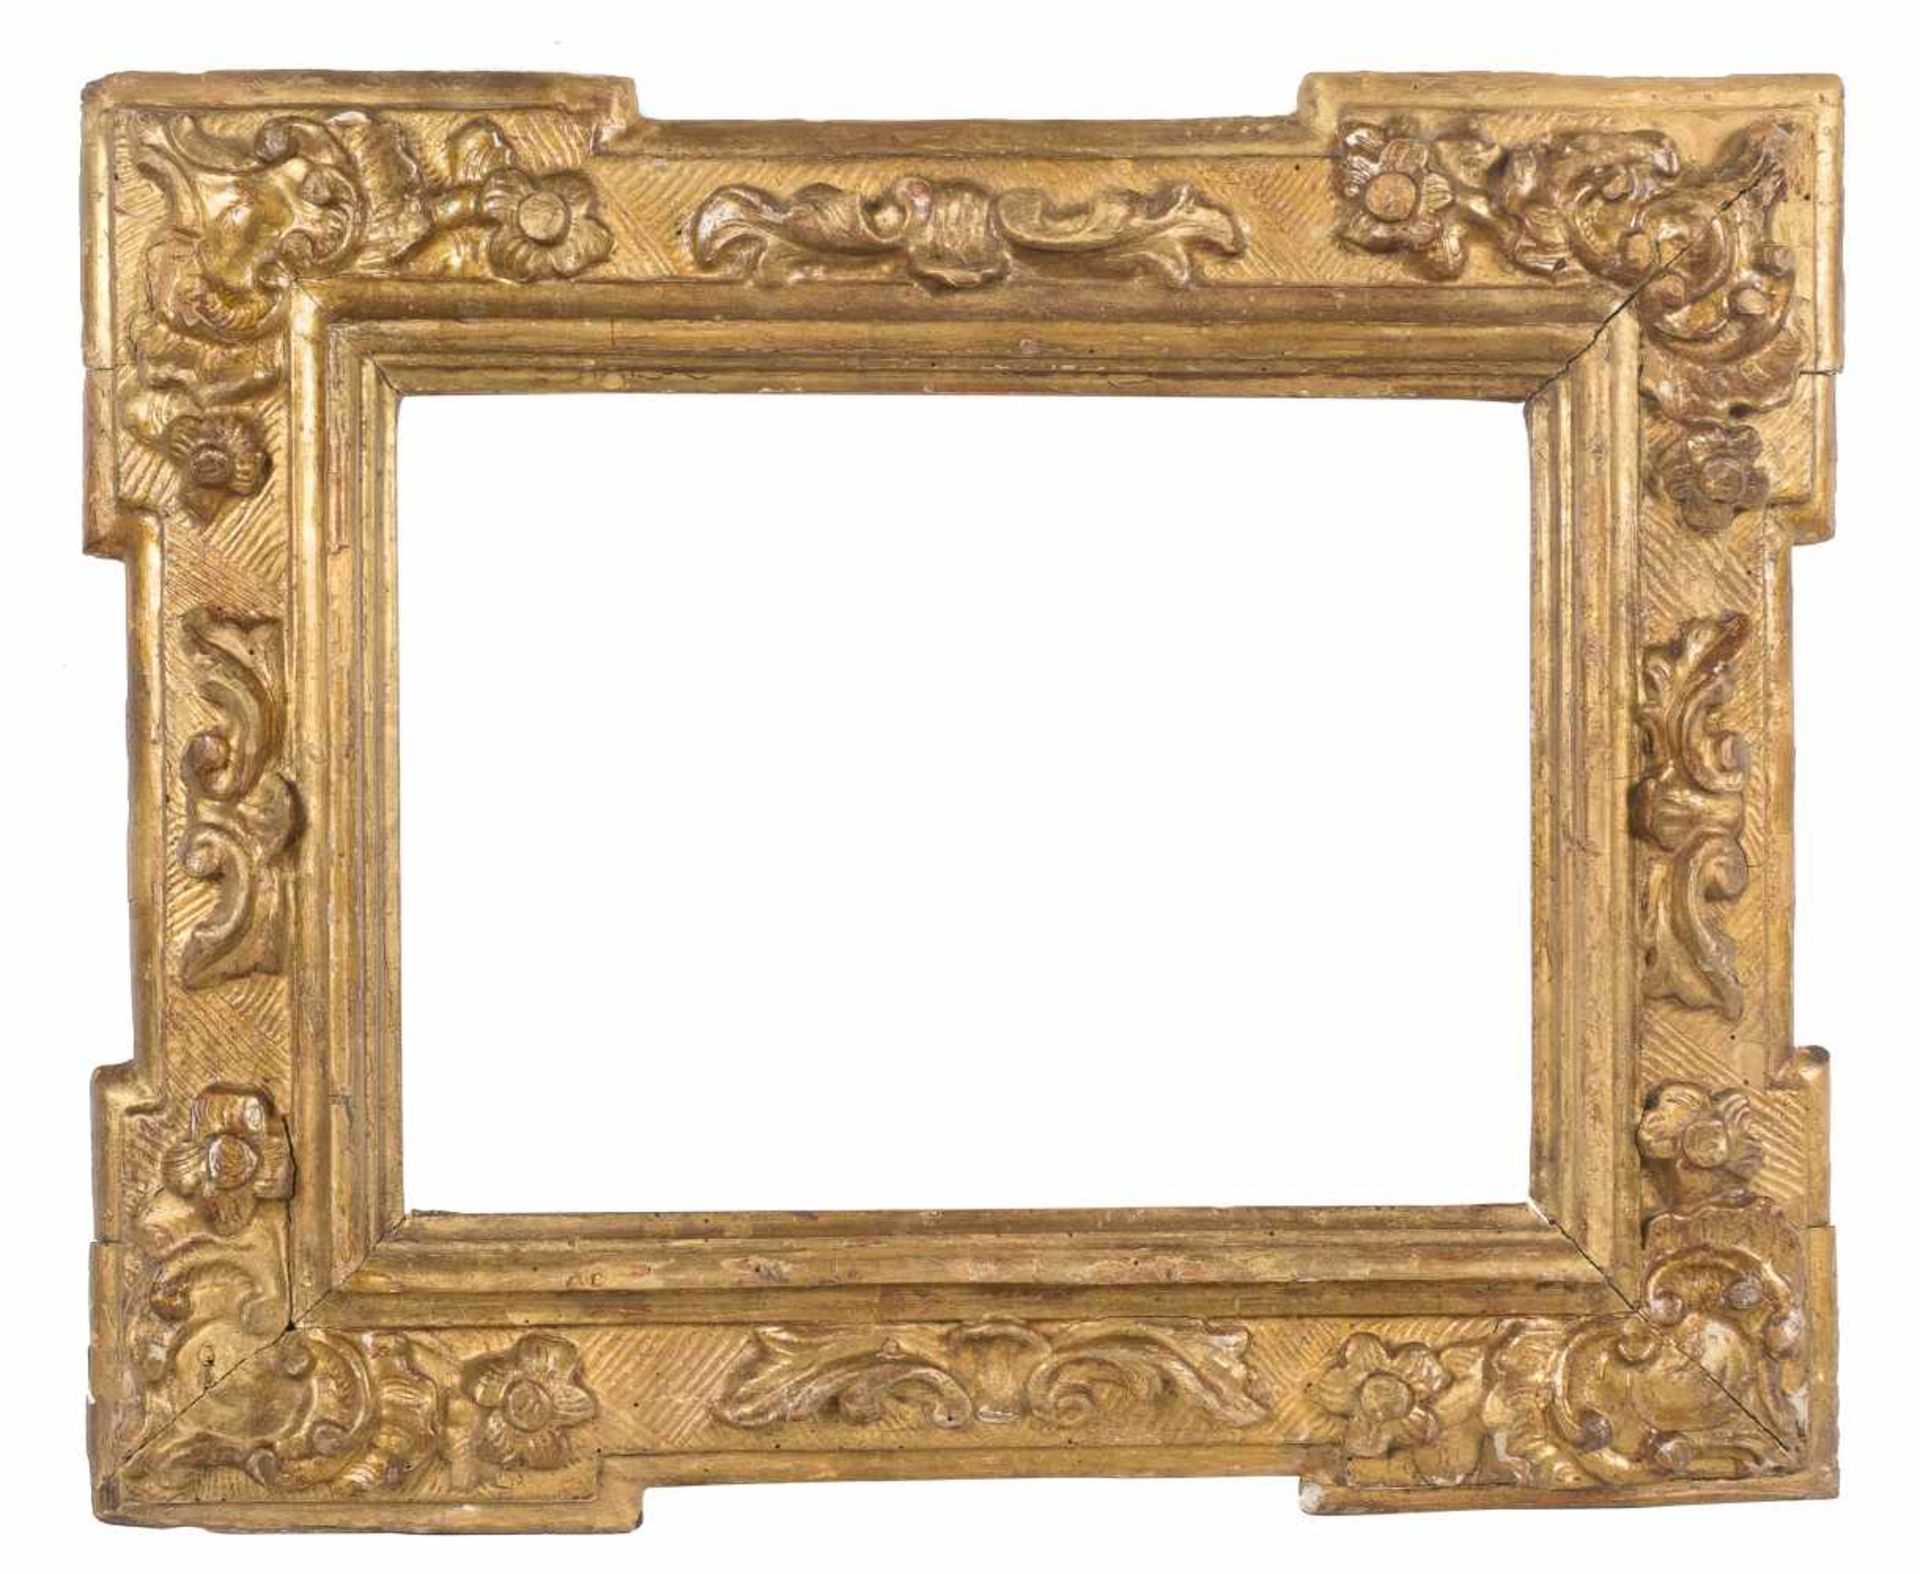 Carved and gilded wooden Spanish frame with corner pieces. 18th century.